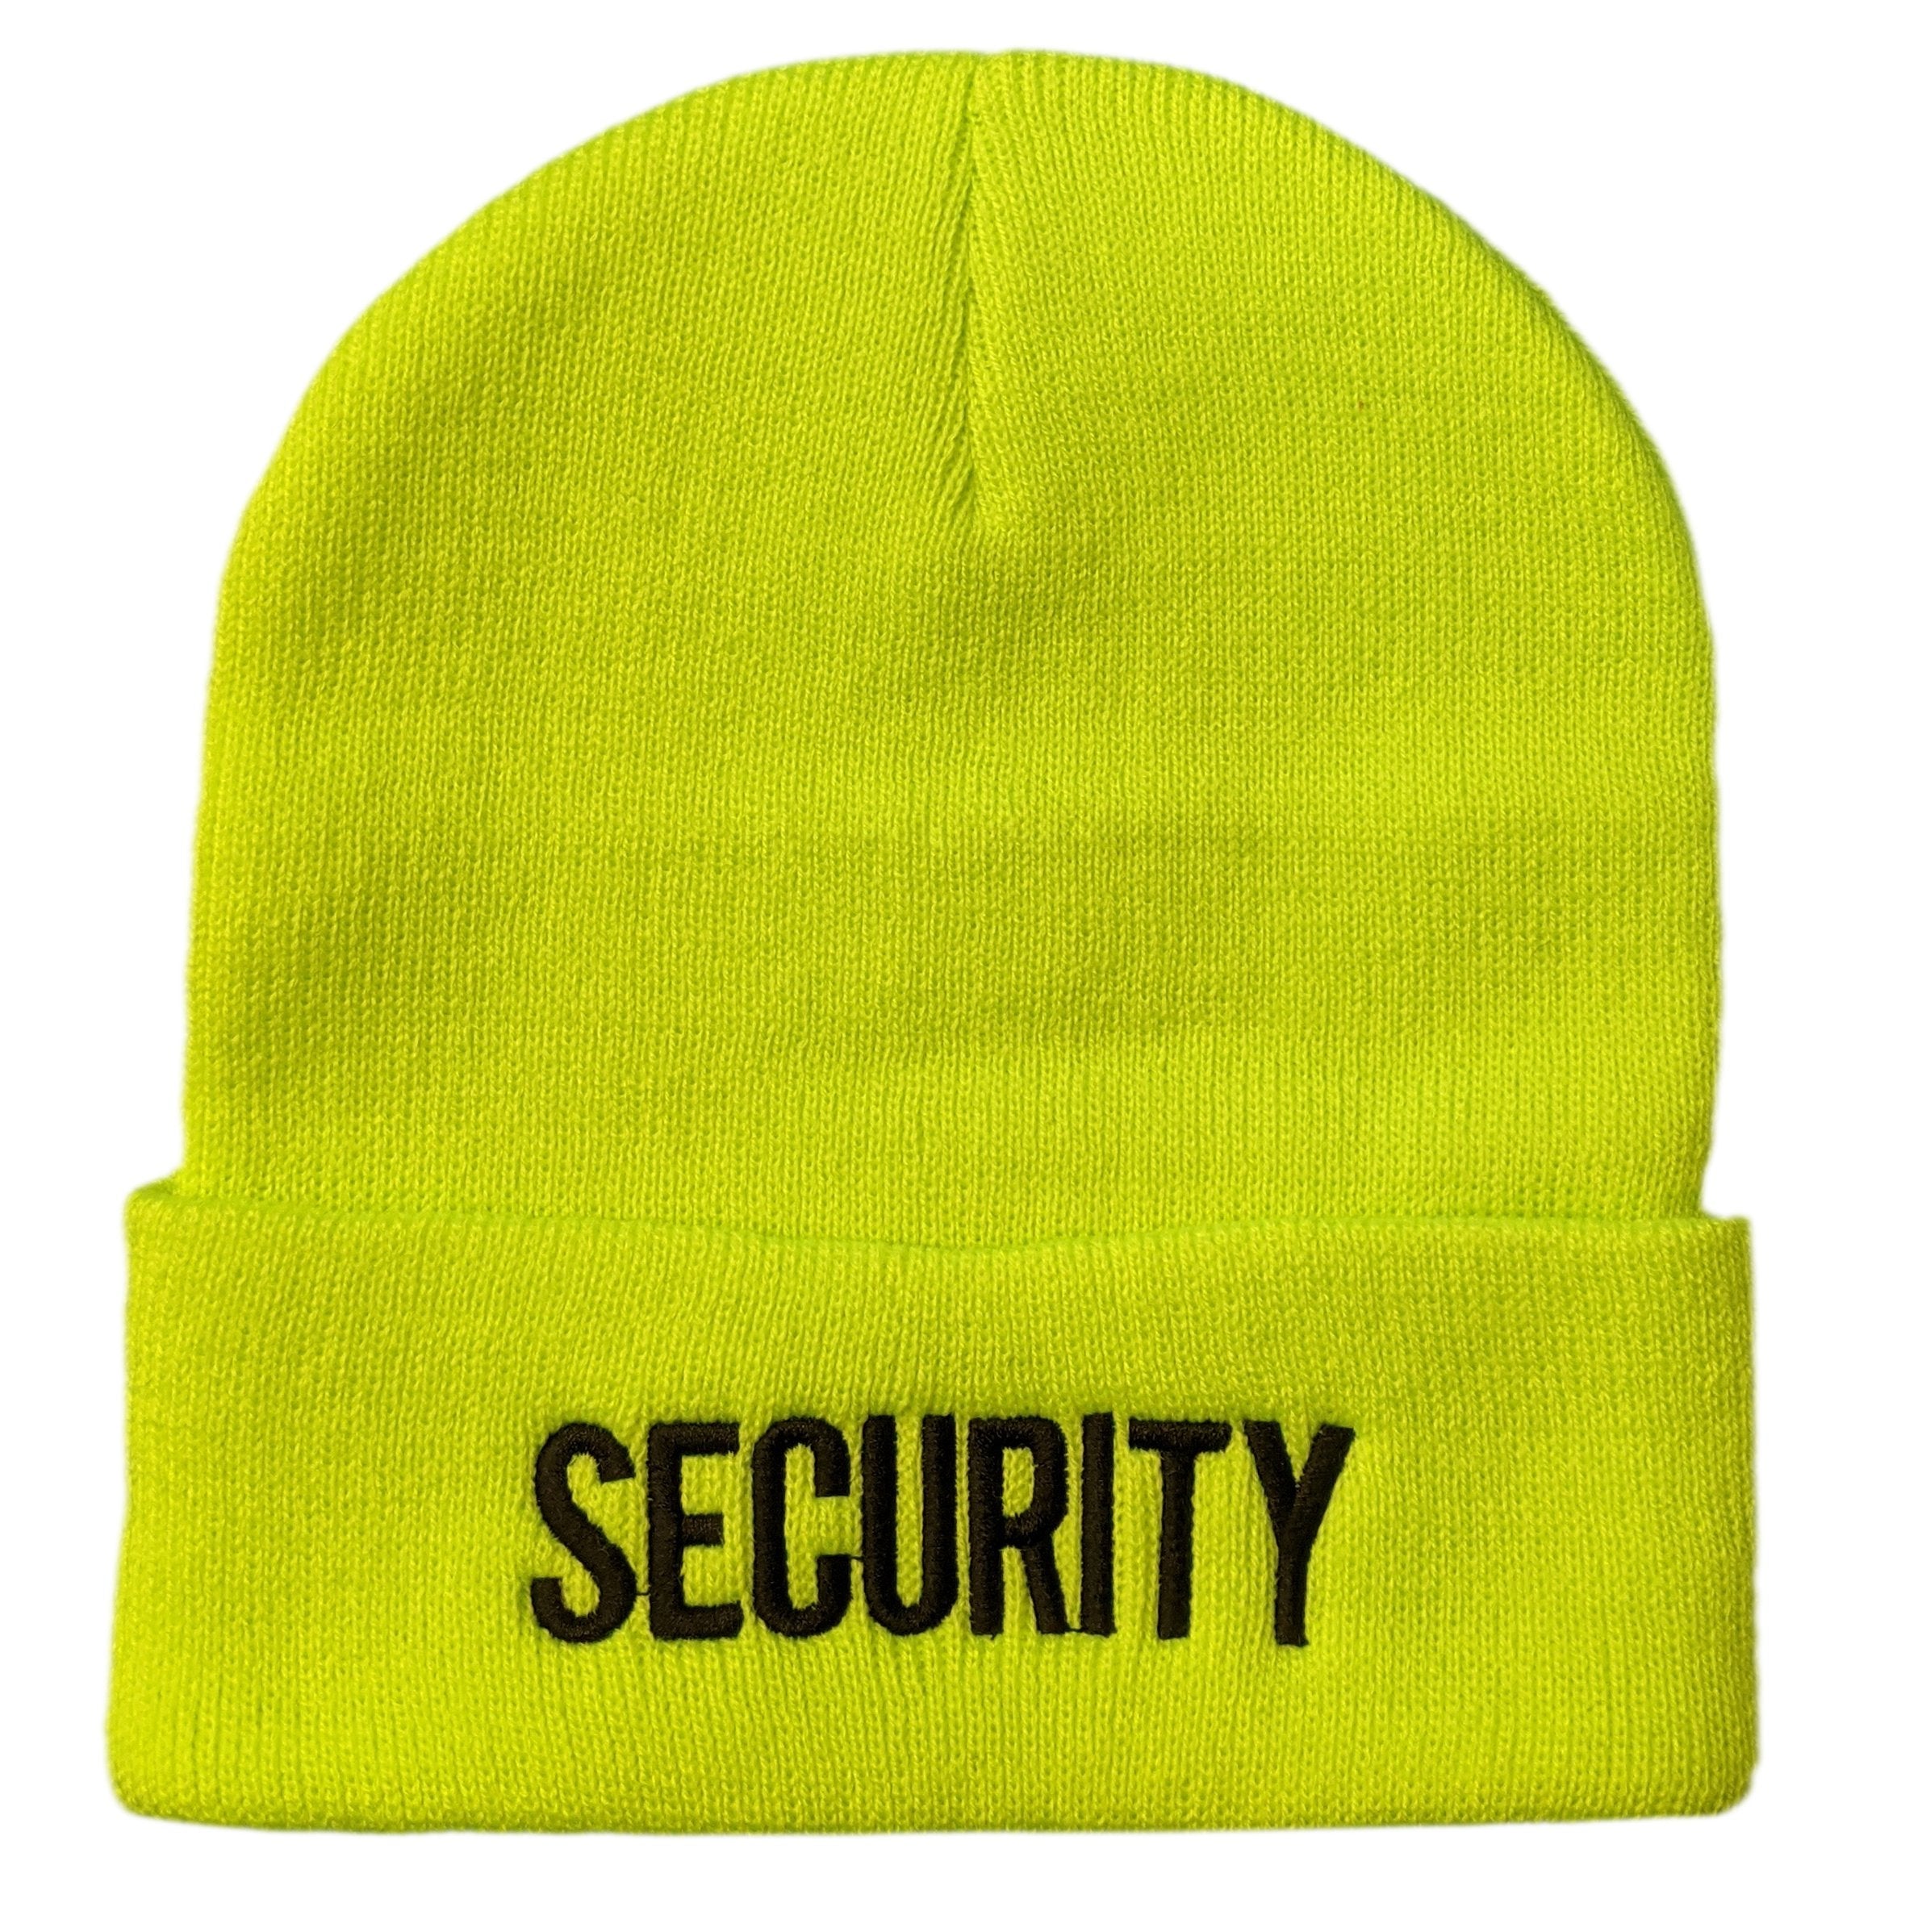 Men's Security Beanie (Safety Green)